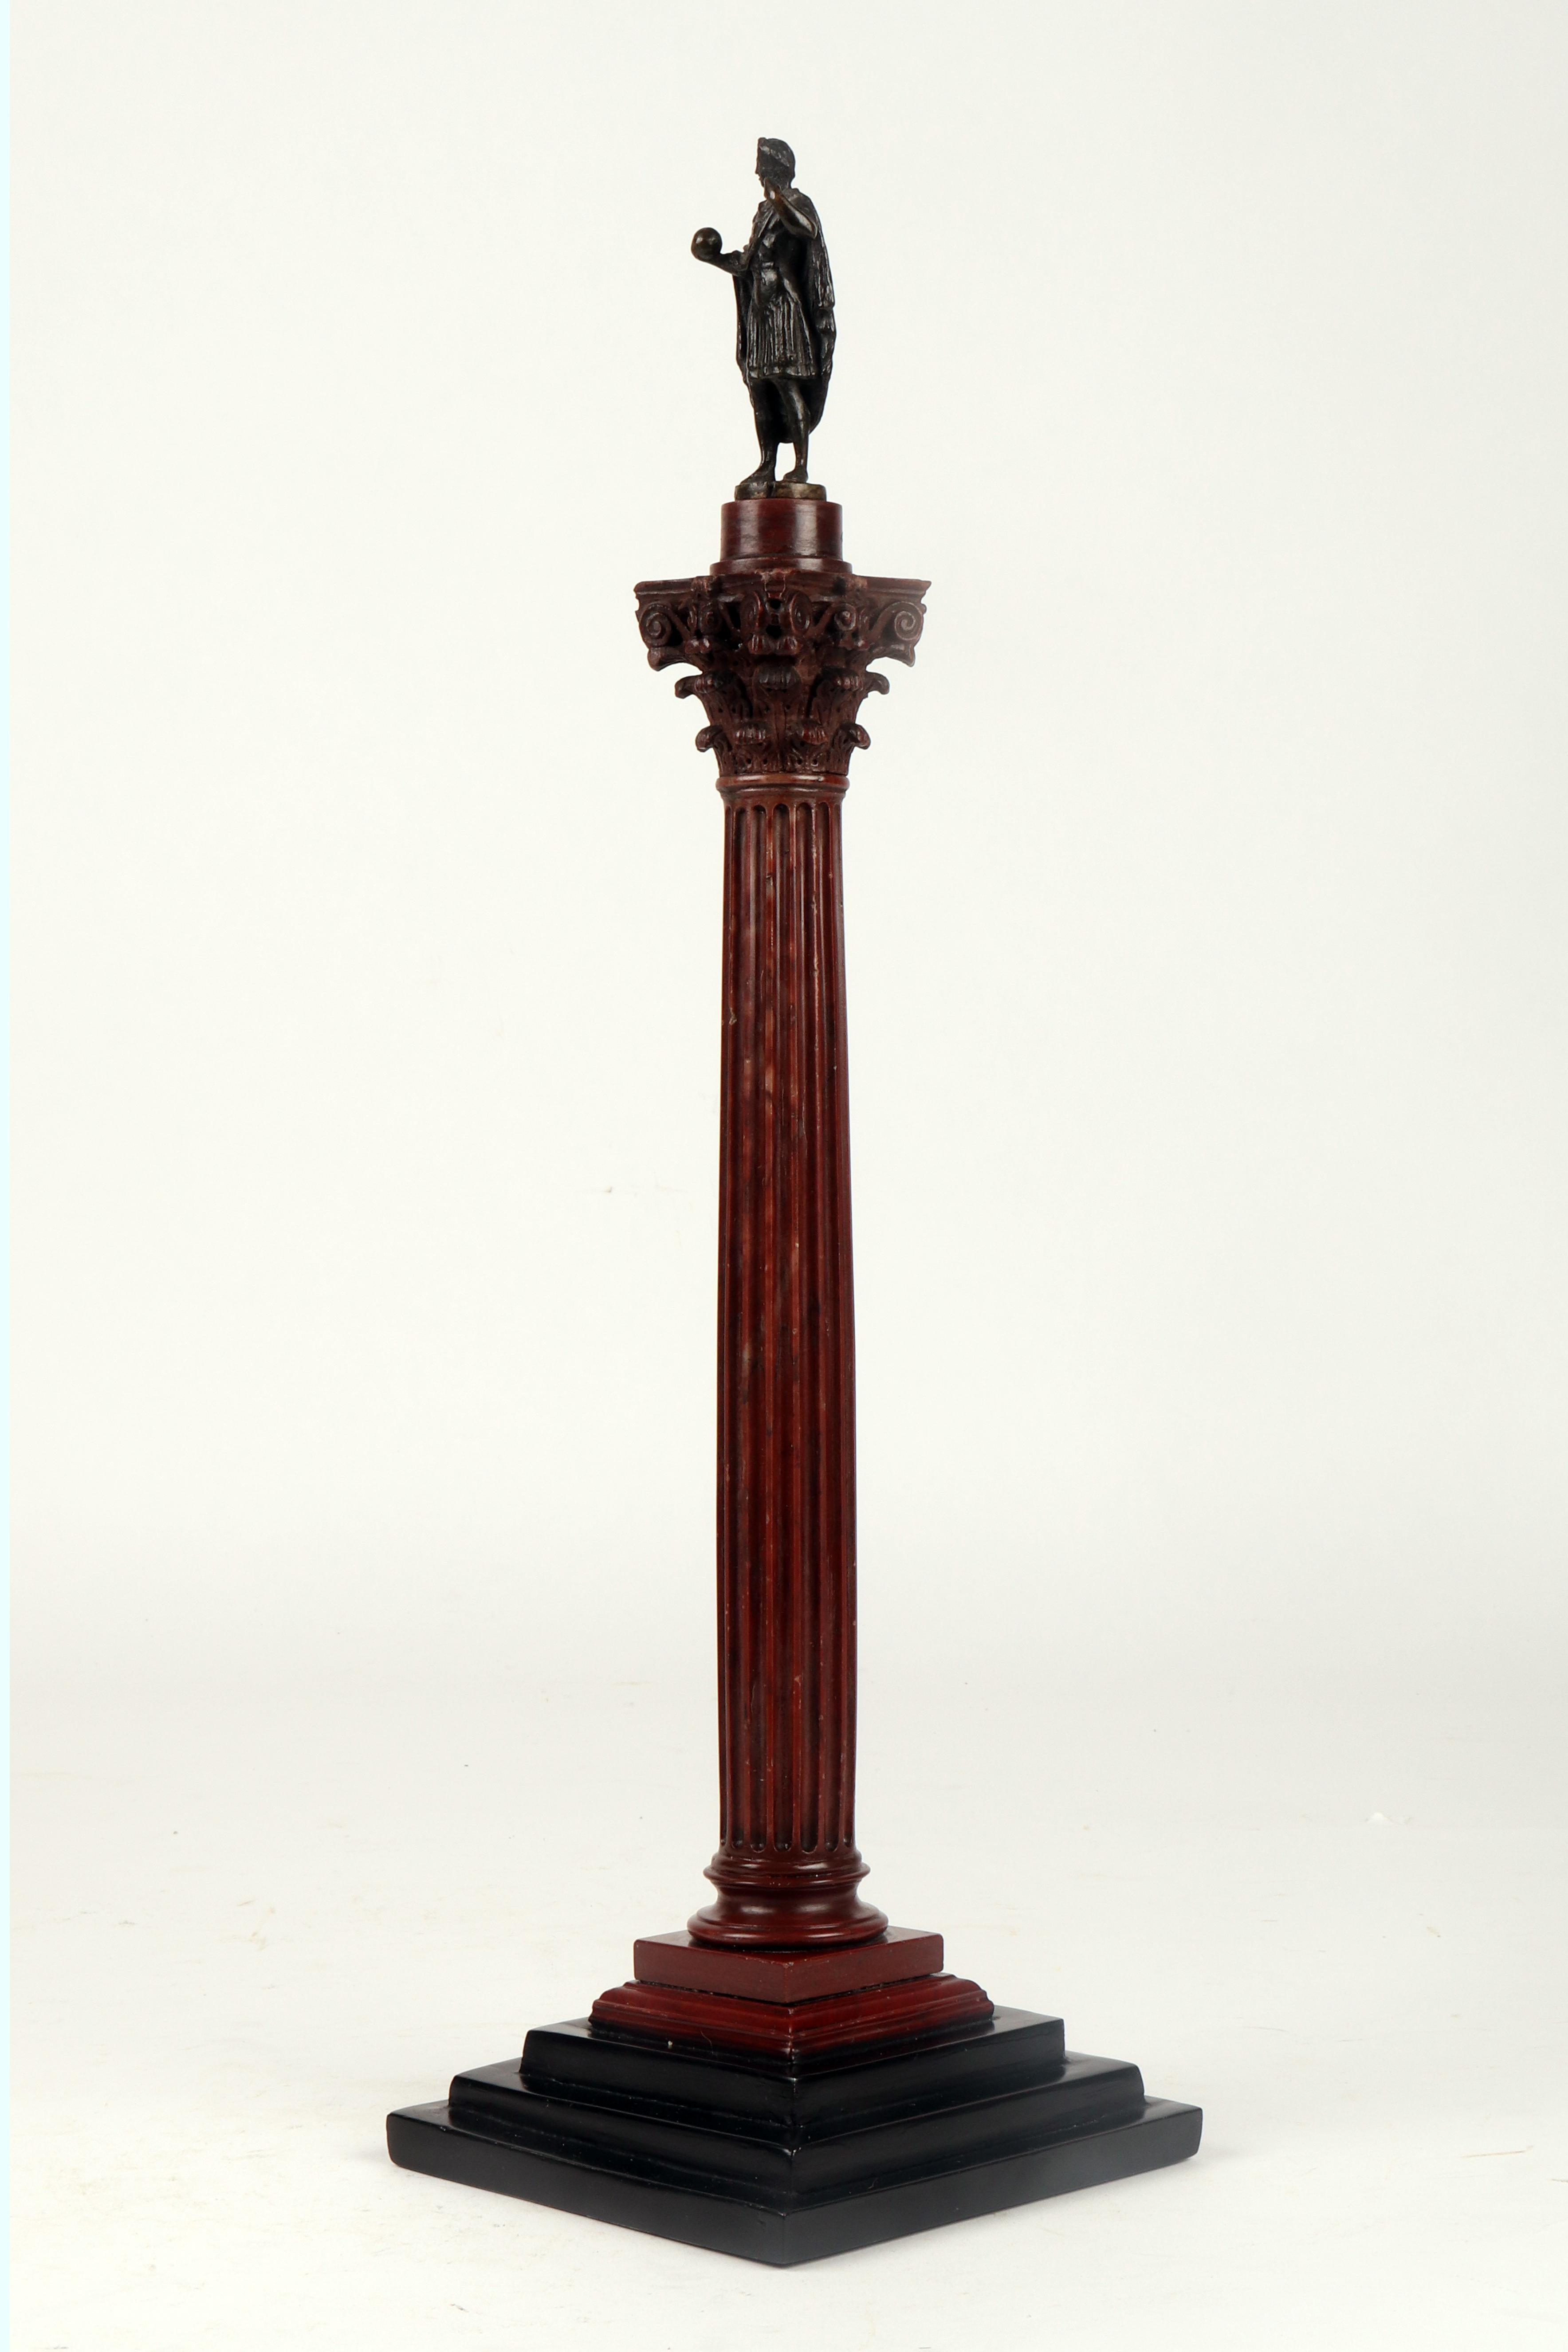 Italian A Grand Tour souvenir, Rome stage. Trajan's column, Italy early 19th century. For Sale